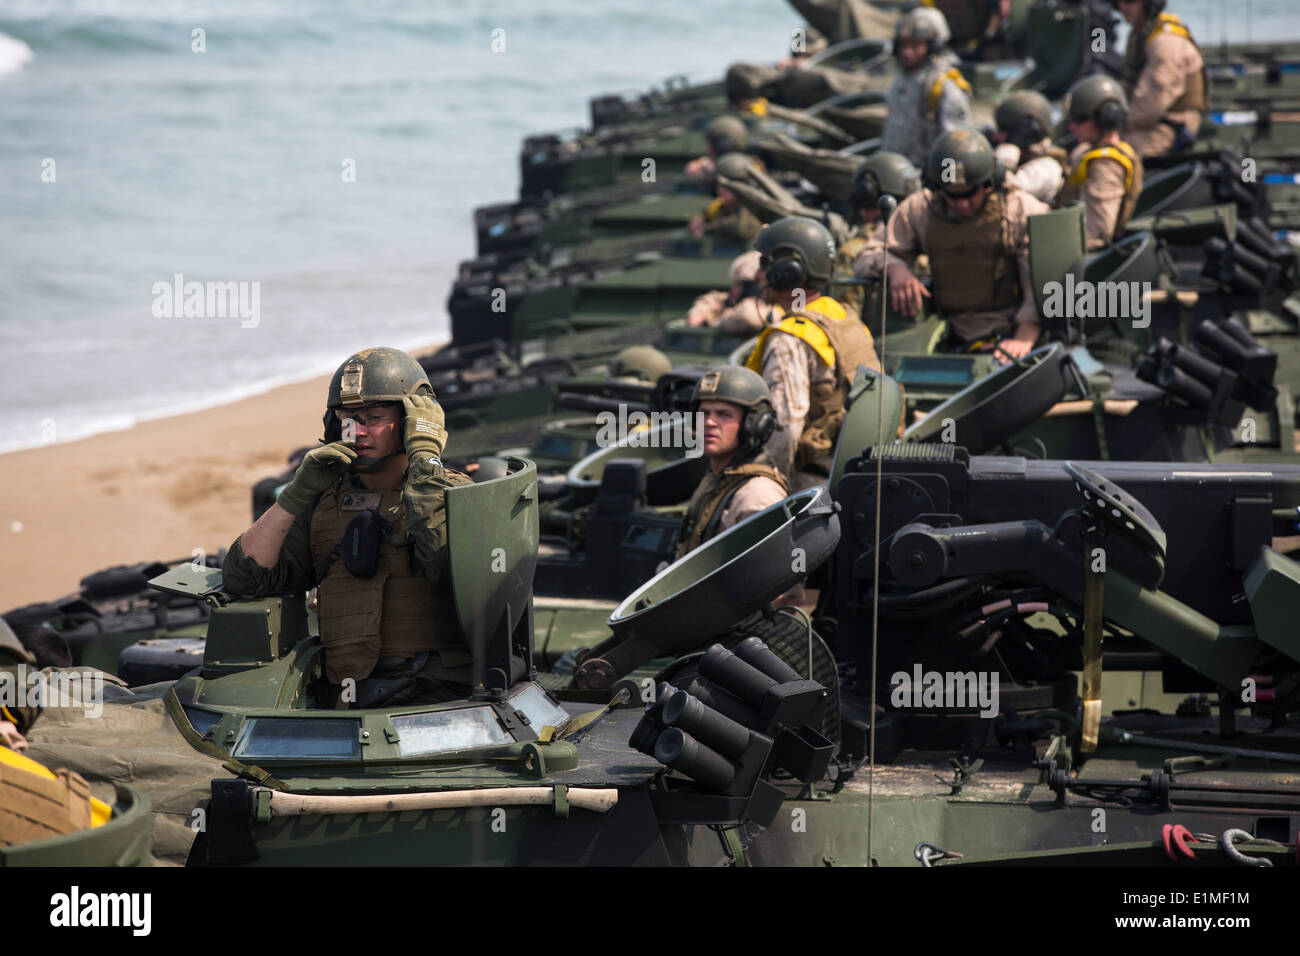 U.S. Marines with the 2nd Battalion, 3rd Marine Regiment, attached to the 4th Marine Regiment, line up in assault amphibious ve Stock Photo